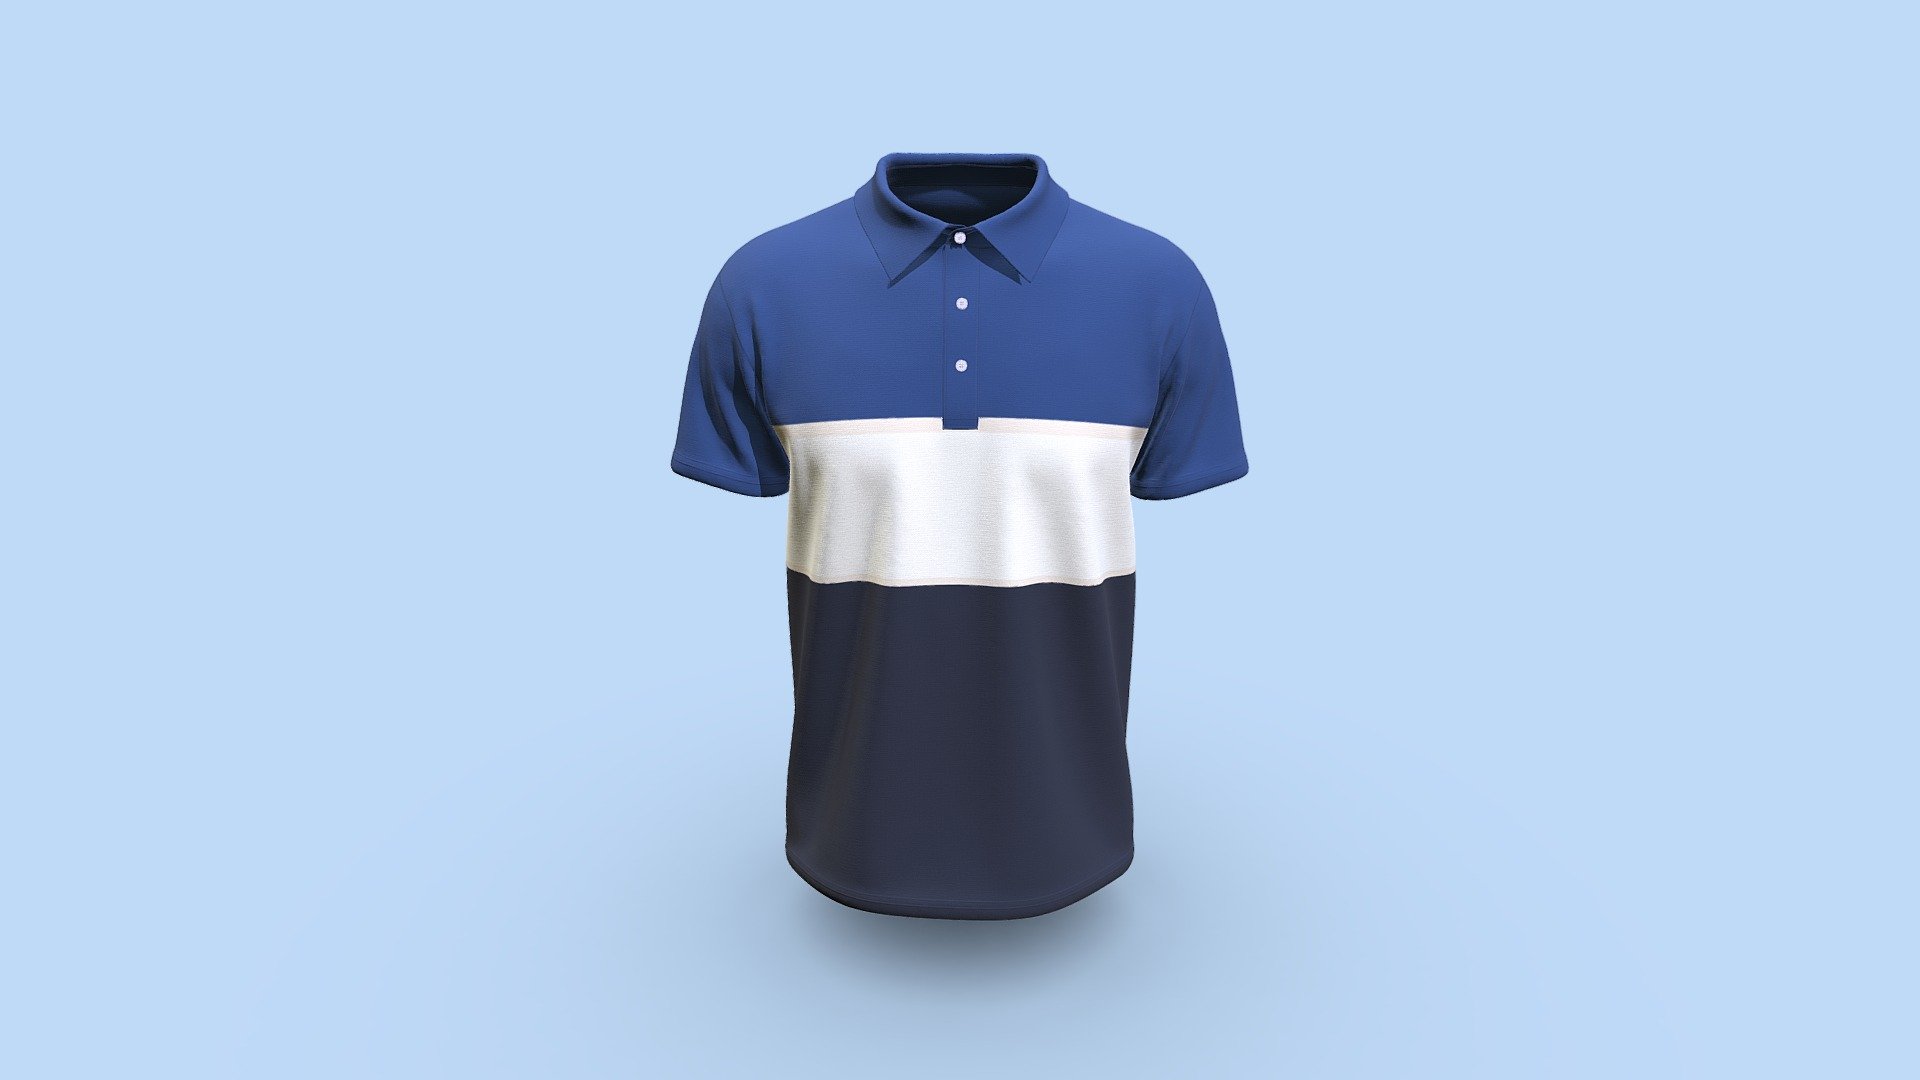 Cloth Title = Premium Polo Design 

SKU = DG100216 

Category = Men 

Product Type = Polo 

Cloth Length = Regular 

Body Fit = Regular Fit 

Occasion = Casual 
 
Sleeve Style = Short Sleeve 


Our Services:

3D Apparel Design.

OBJ,FBX,GLTF Making with High/Low Poly.

Fabric Digitalization.

Mockup making.

3D Teck Pack.

Pattern Making.

2D Illustration.

Cloth Animation and 360 Spin Video.


Contact us:- 

Email: info@digitalfashionwear.com 

Website: https://digitalfashionwear.com 


We designed all the types of cloth specially focused on product visualization, e-commerce, fitting, and production. 

We will design: 

T-shirts 

Polo shirts 

Hoodies 

Sweatshirt 

Jackets 

Shirts 

TankTops 

Trousers 

Bras 

Underwear 

Blazer 

Aprons 

Leggings 

and All Fashion items. 





Our goal is to make sure what we provide you, meets your demand 3d model